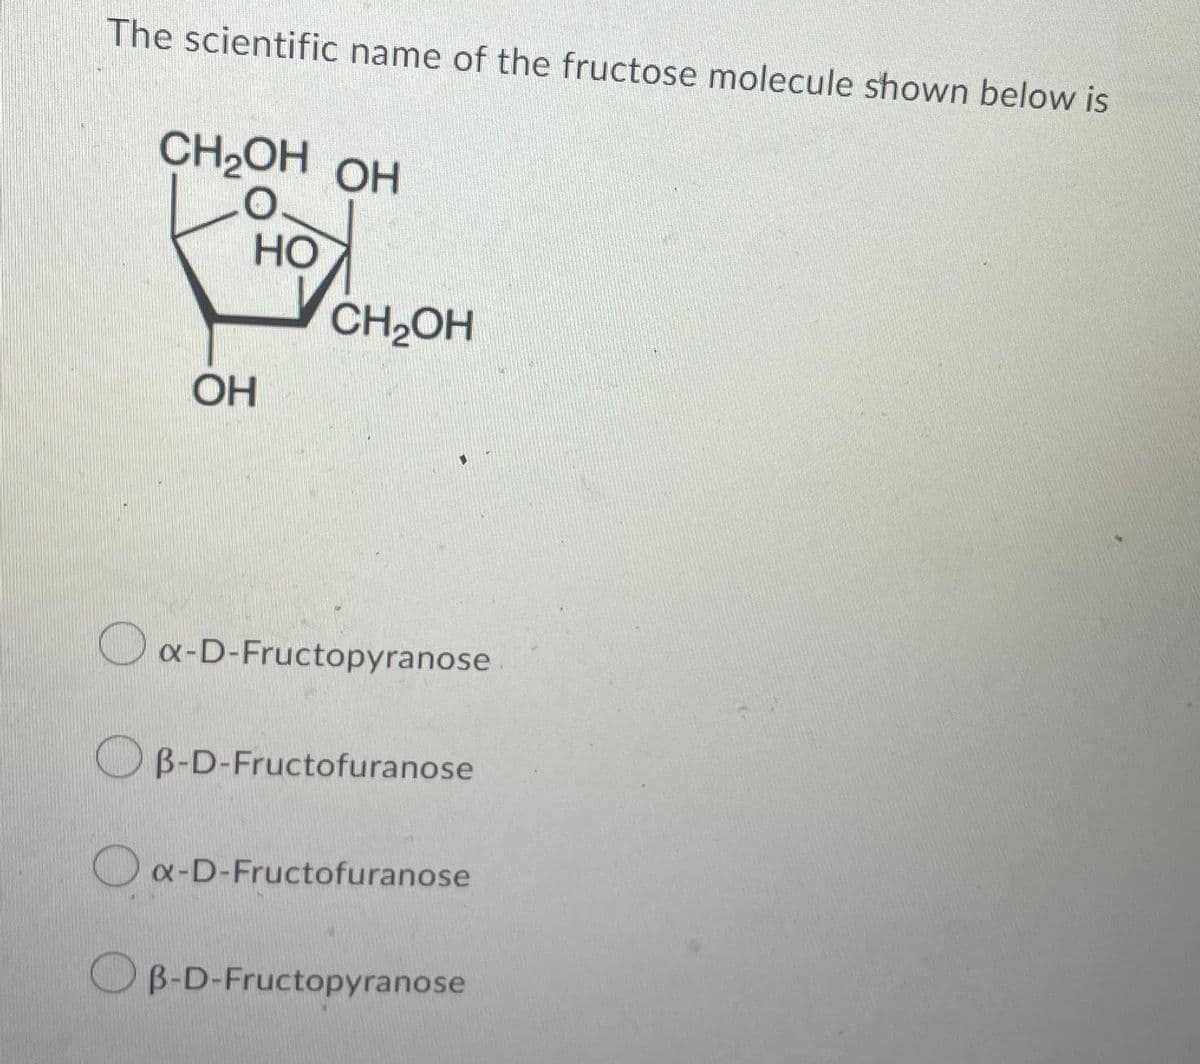 The scientific name of the fructose molecule shown below is
CH2OH OH
O
HO
OH
CH₂OH
Ox-D-Fructopyranose
OB-D-Fructofuranose
Ox-D-Fructofuranose
OB-D-Fructopyranose